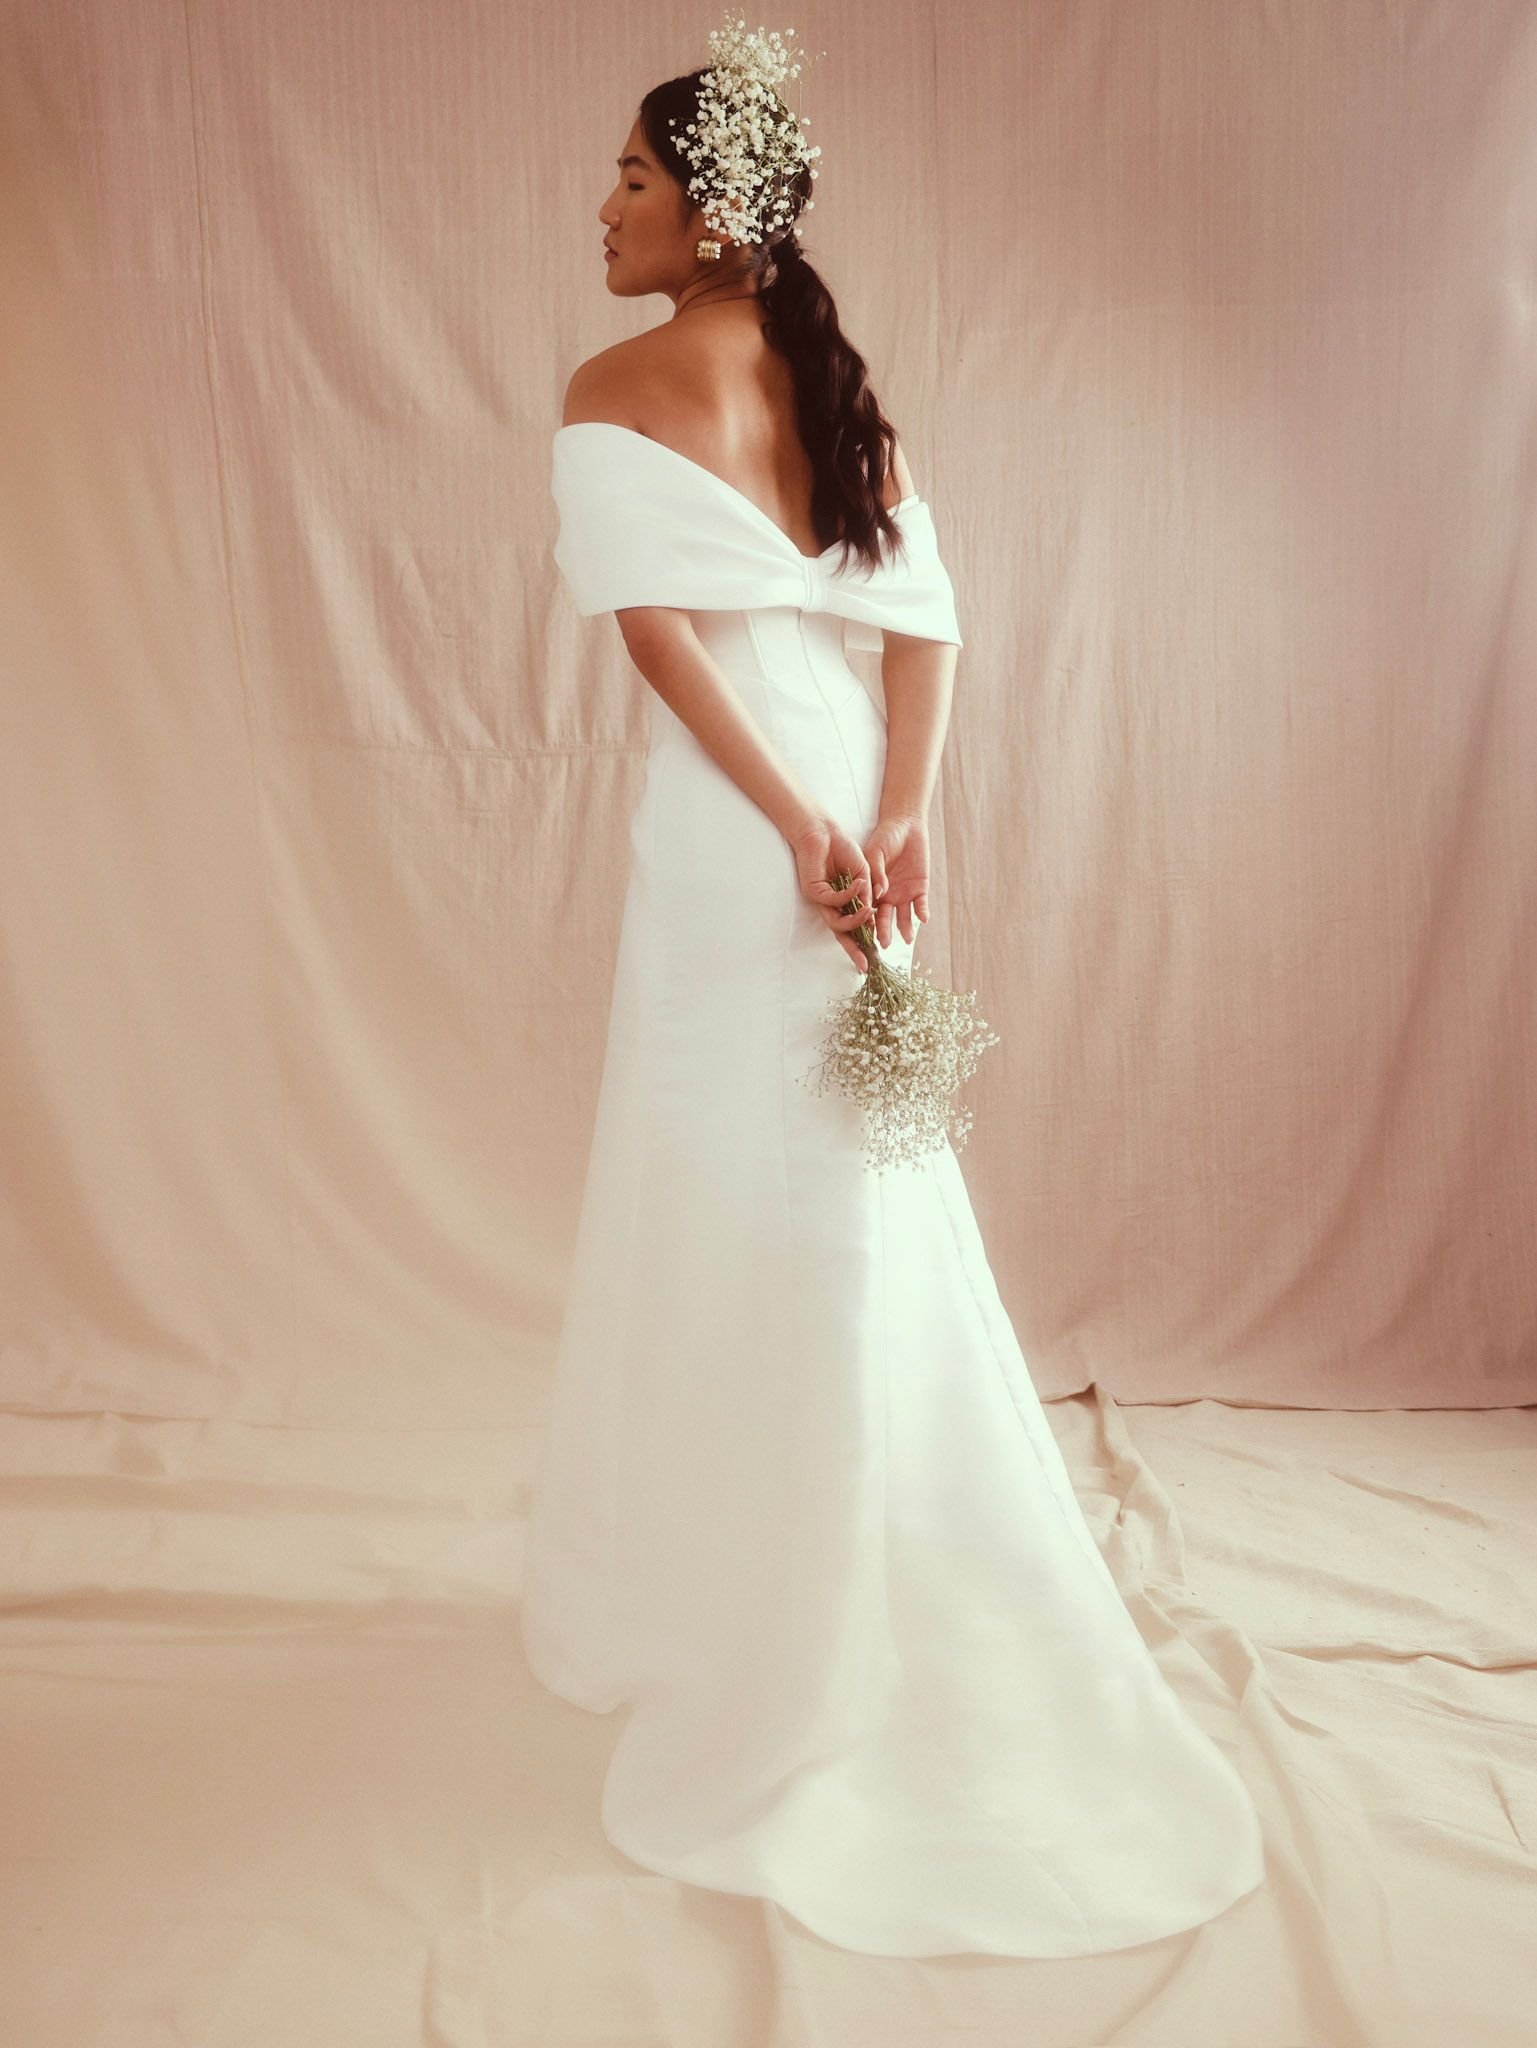 blanc-de-blanc-bridal-boutique-pittsburgh-cleveland-dress-wedding-gown-house-of-renhue-anderson-shawl.jpeg